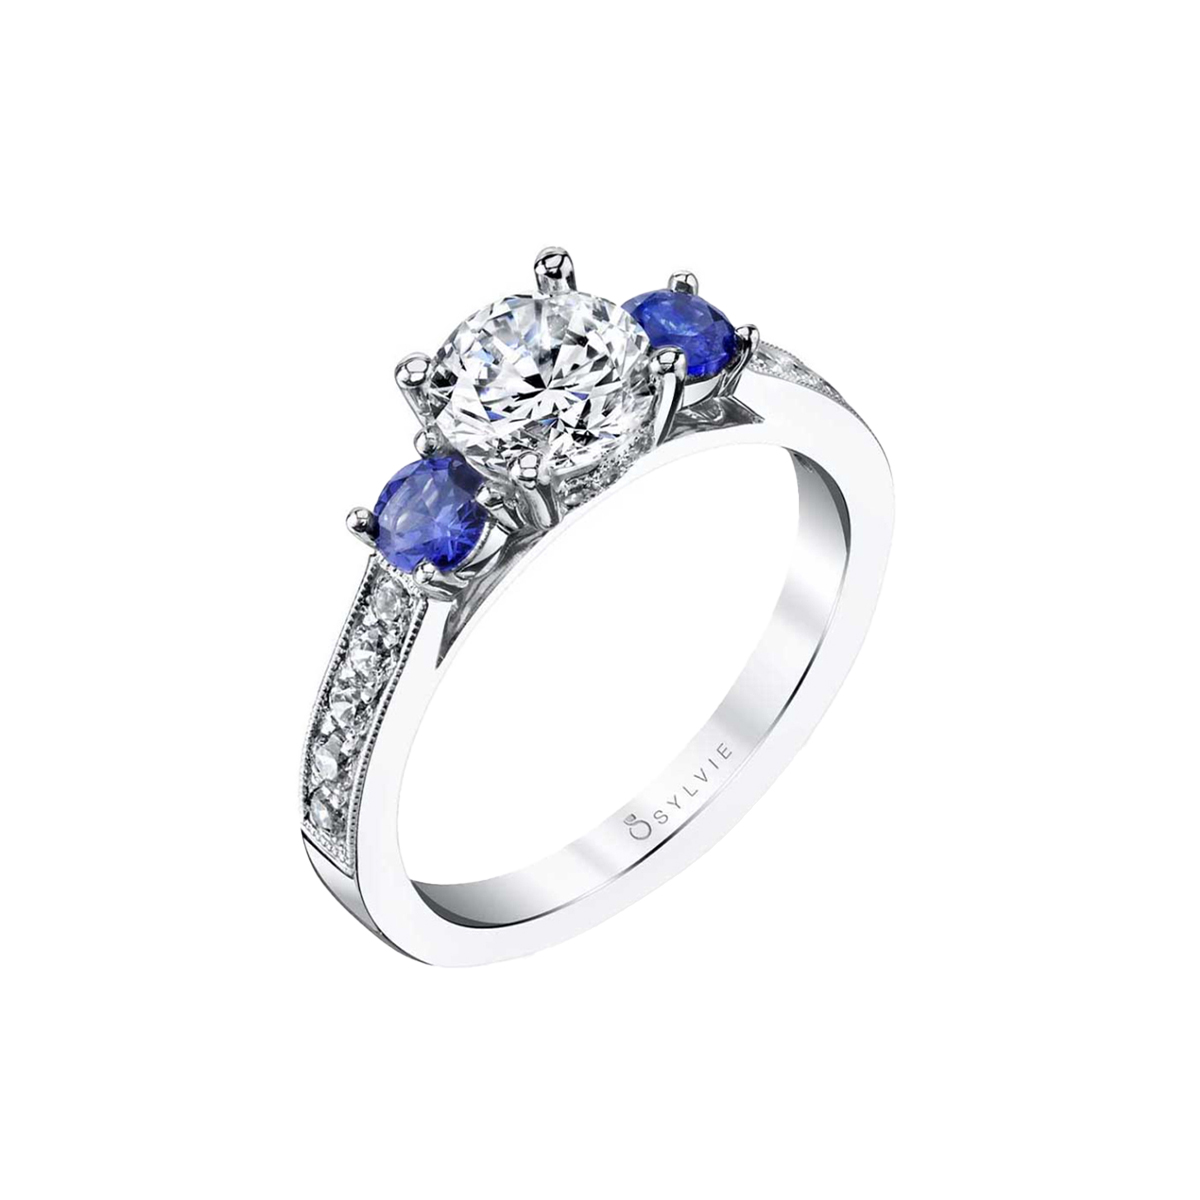 14K White Gold Diamond and Sapphire Engagement Ring Mounting